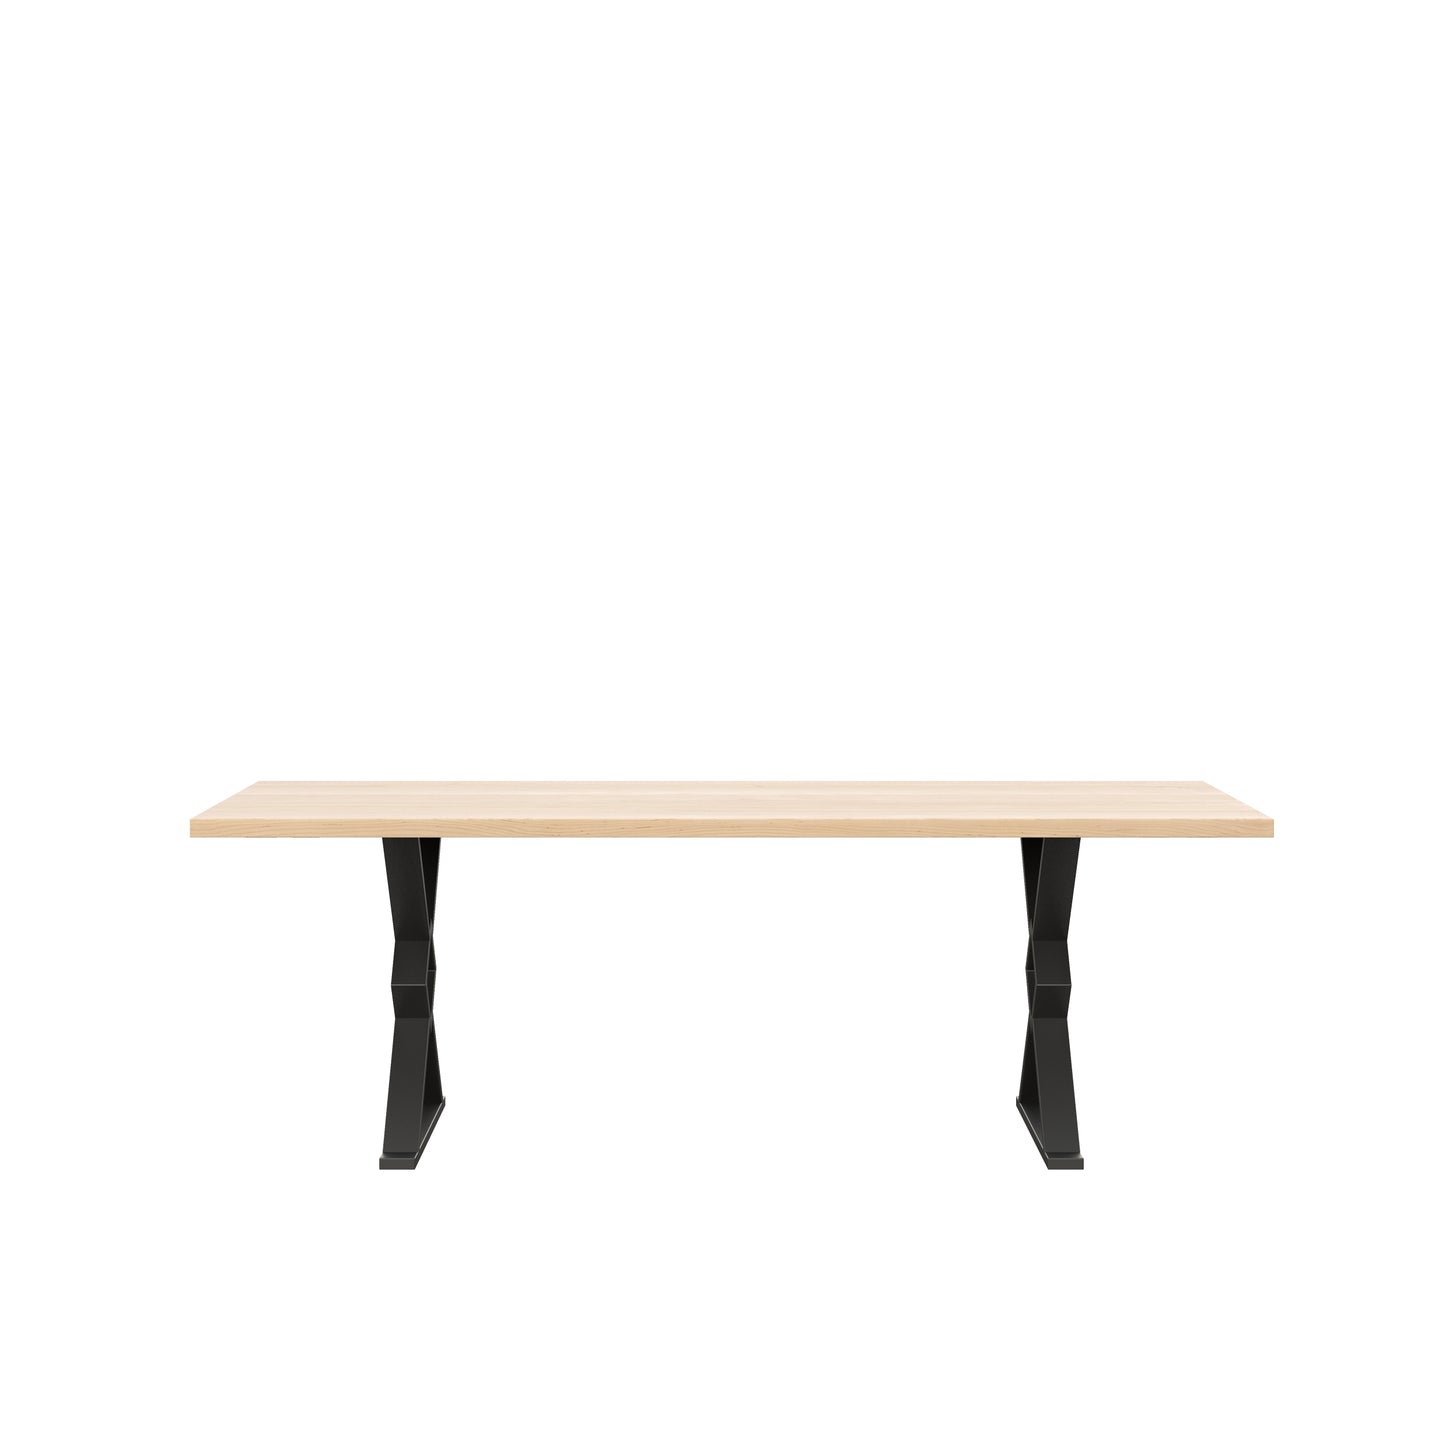 The Fox Wooden Dining Table